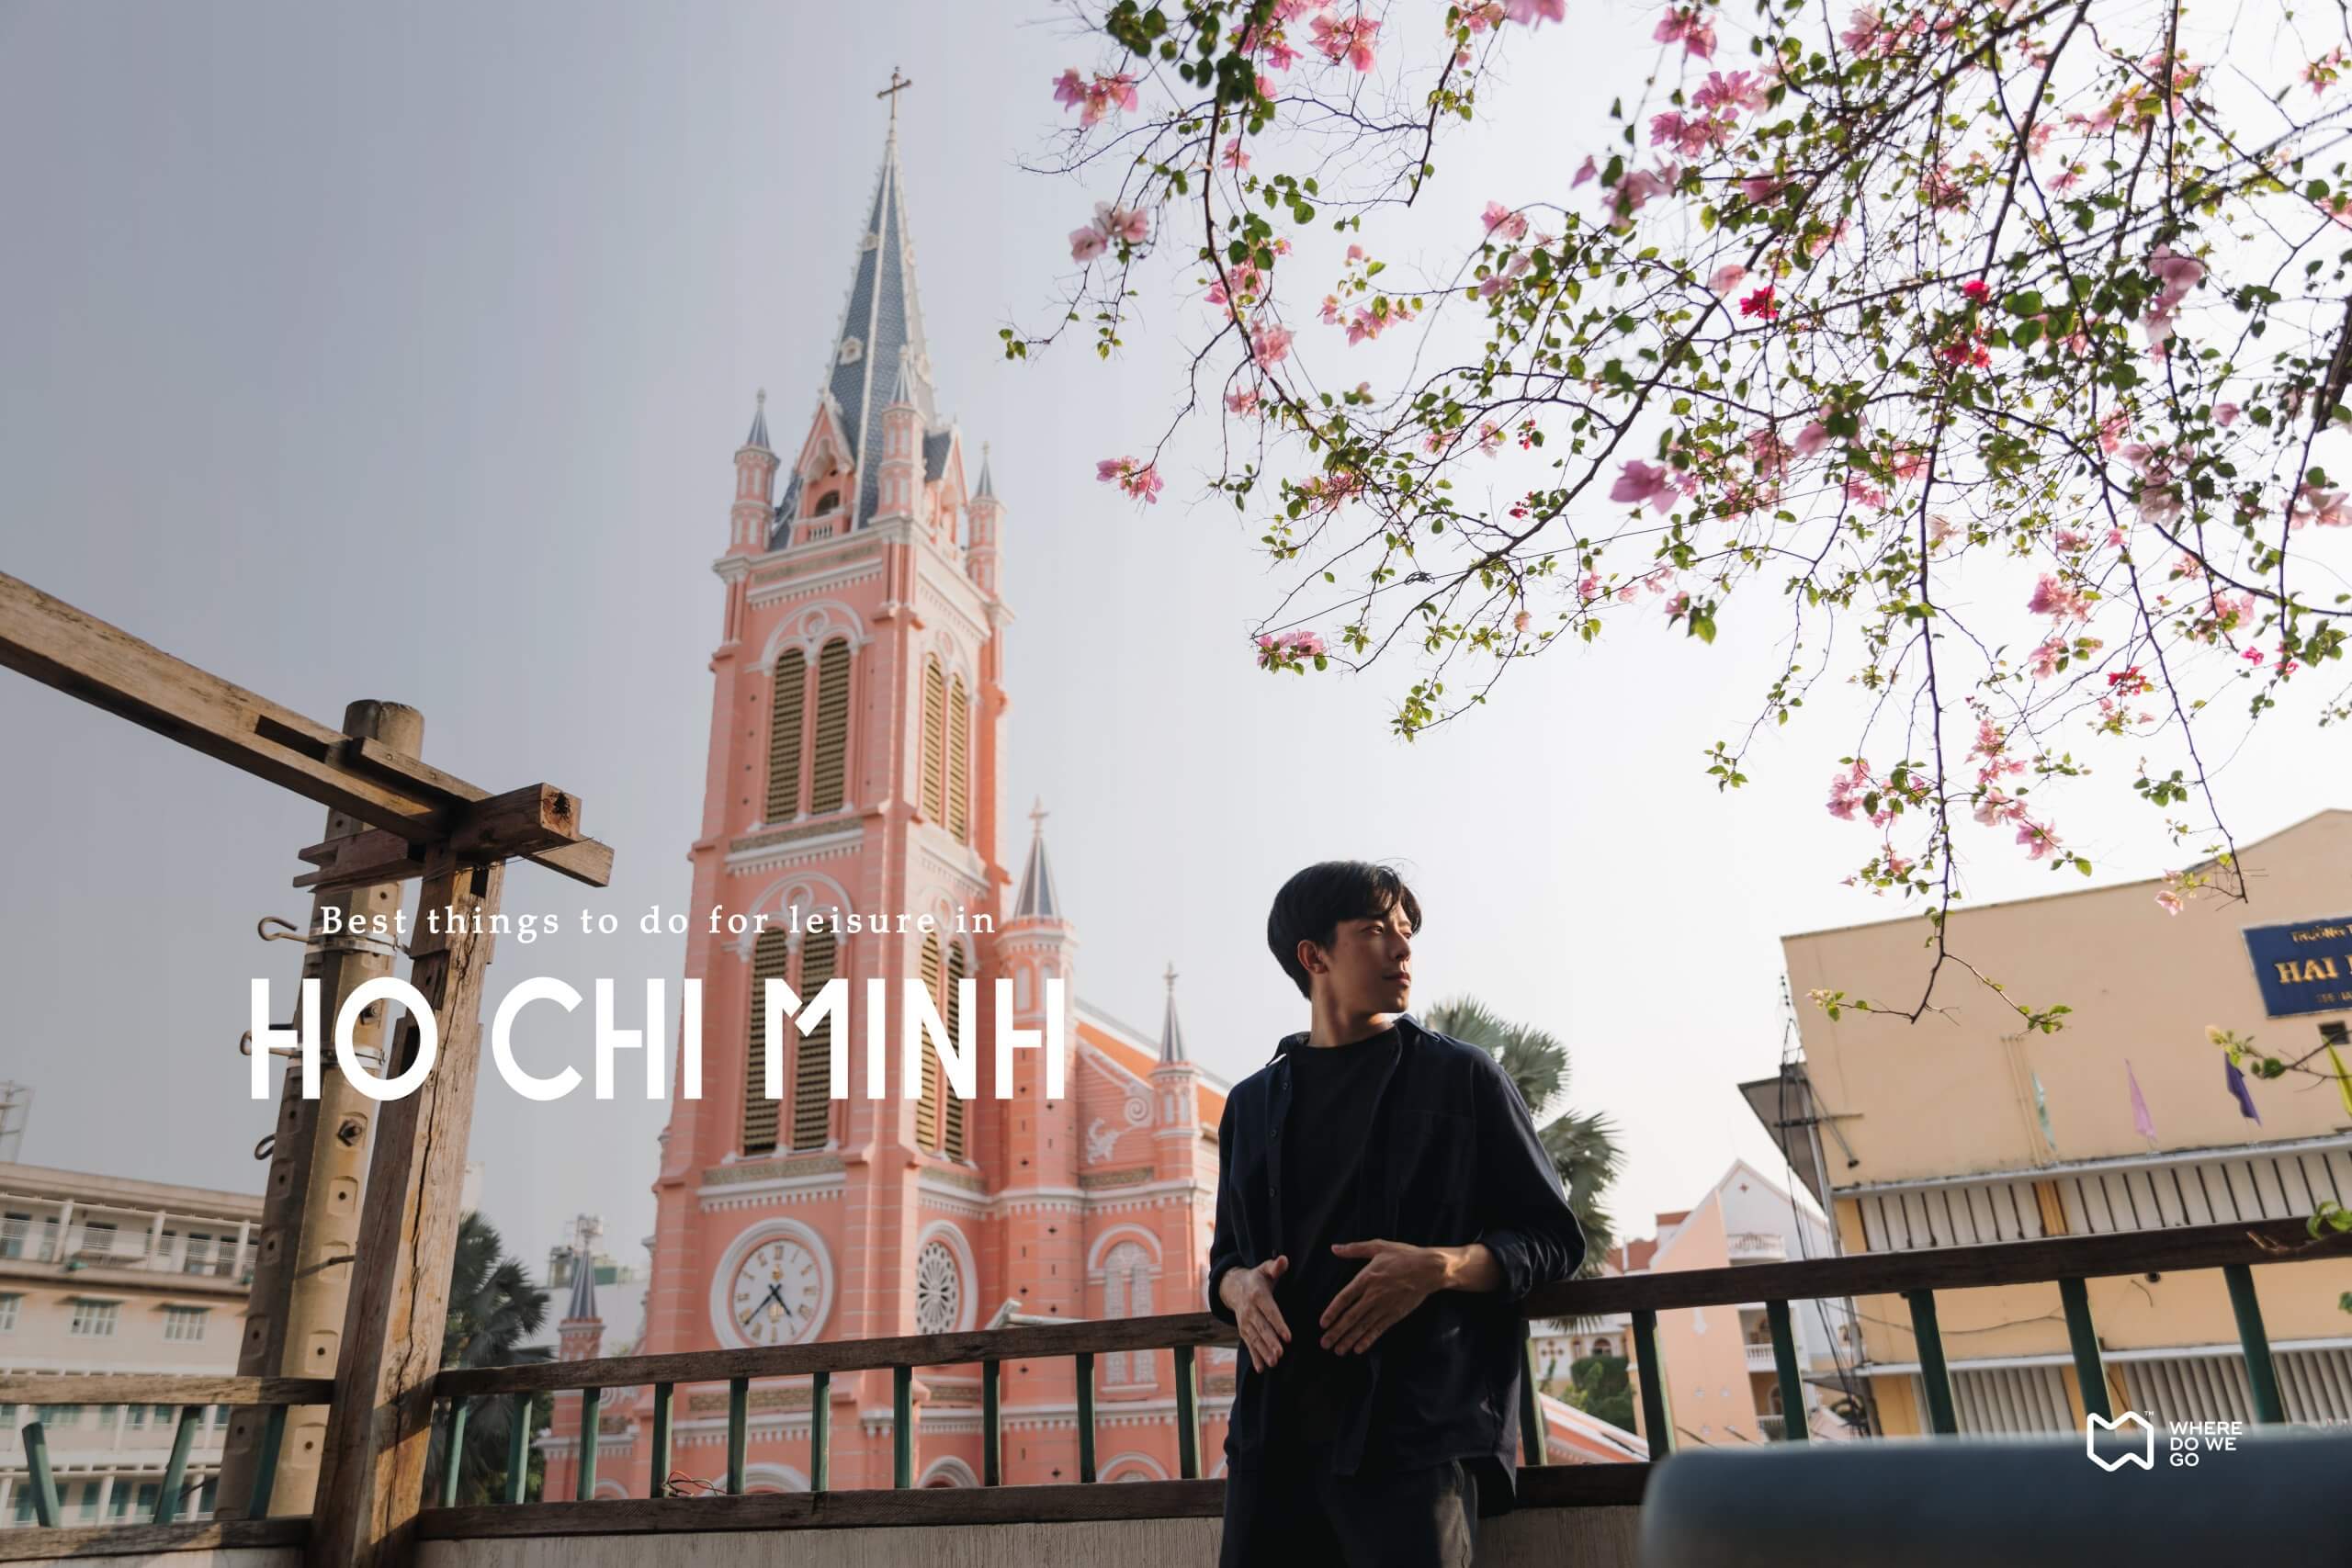 Best thing to do for leisure in HO CHI MINH.